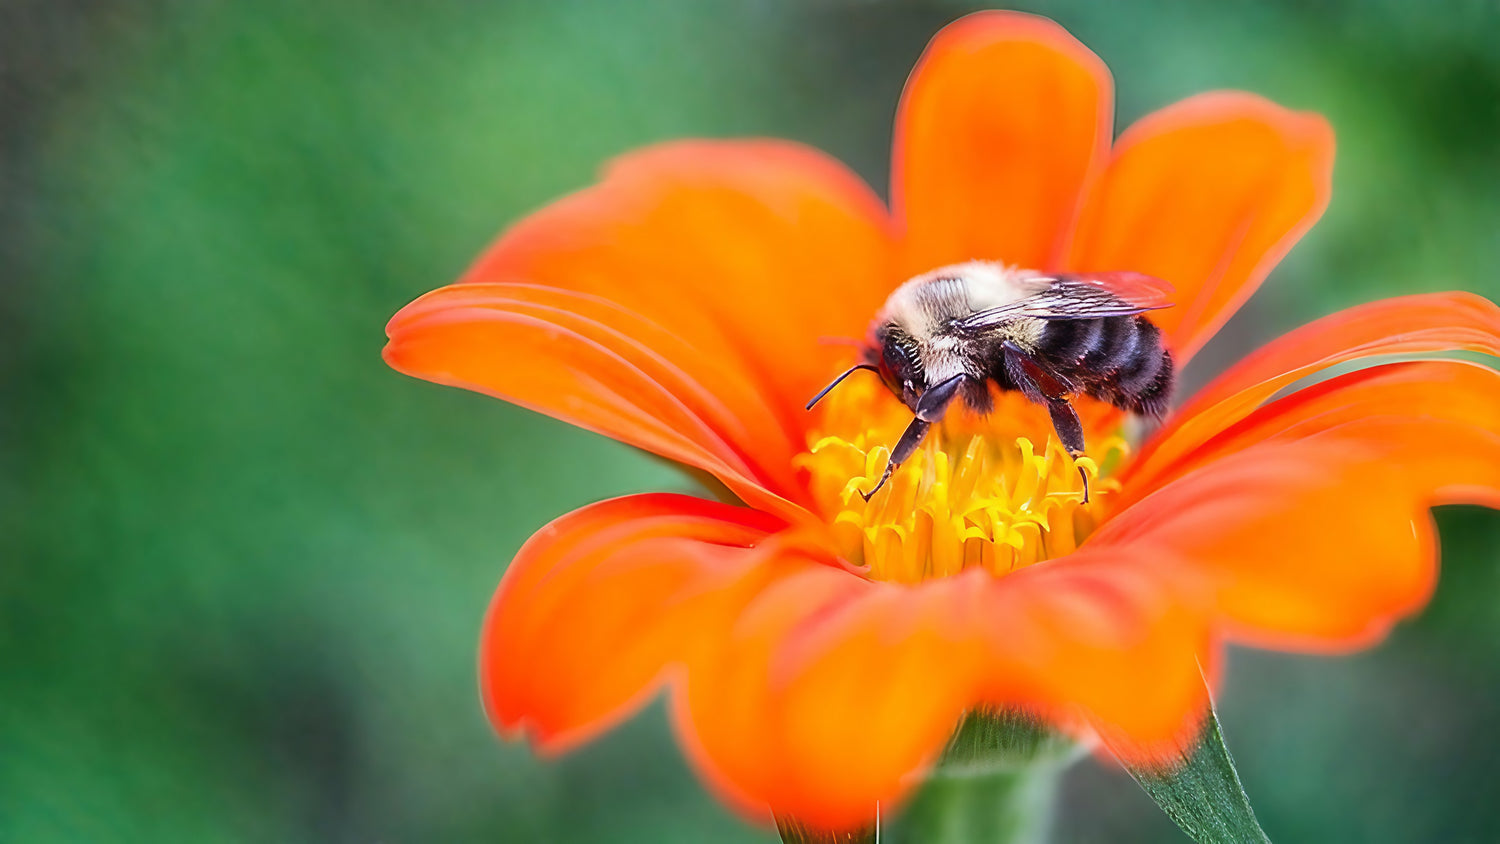 Close-up of a Tithonia Goldfinger flower with a bee pollinating